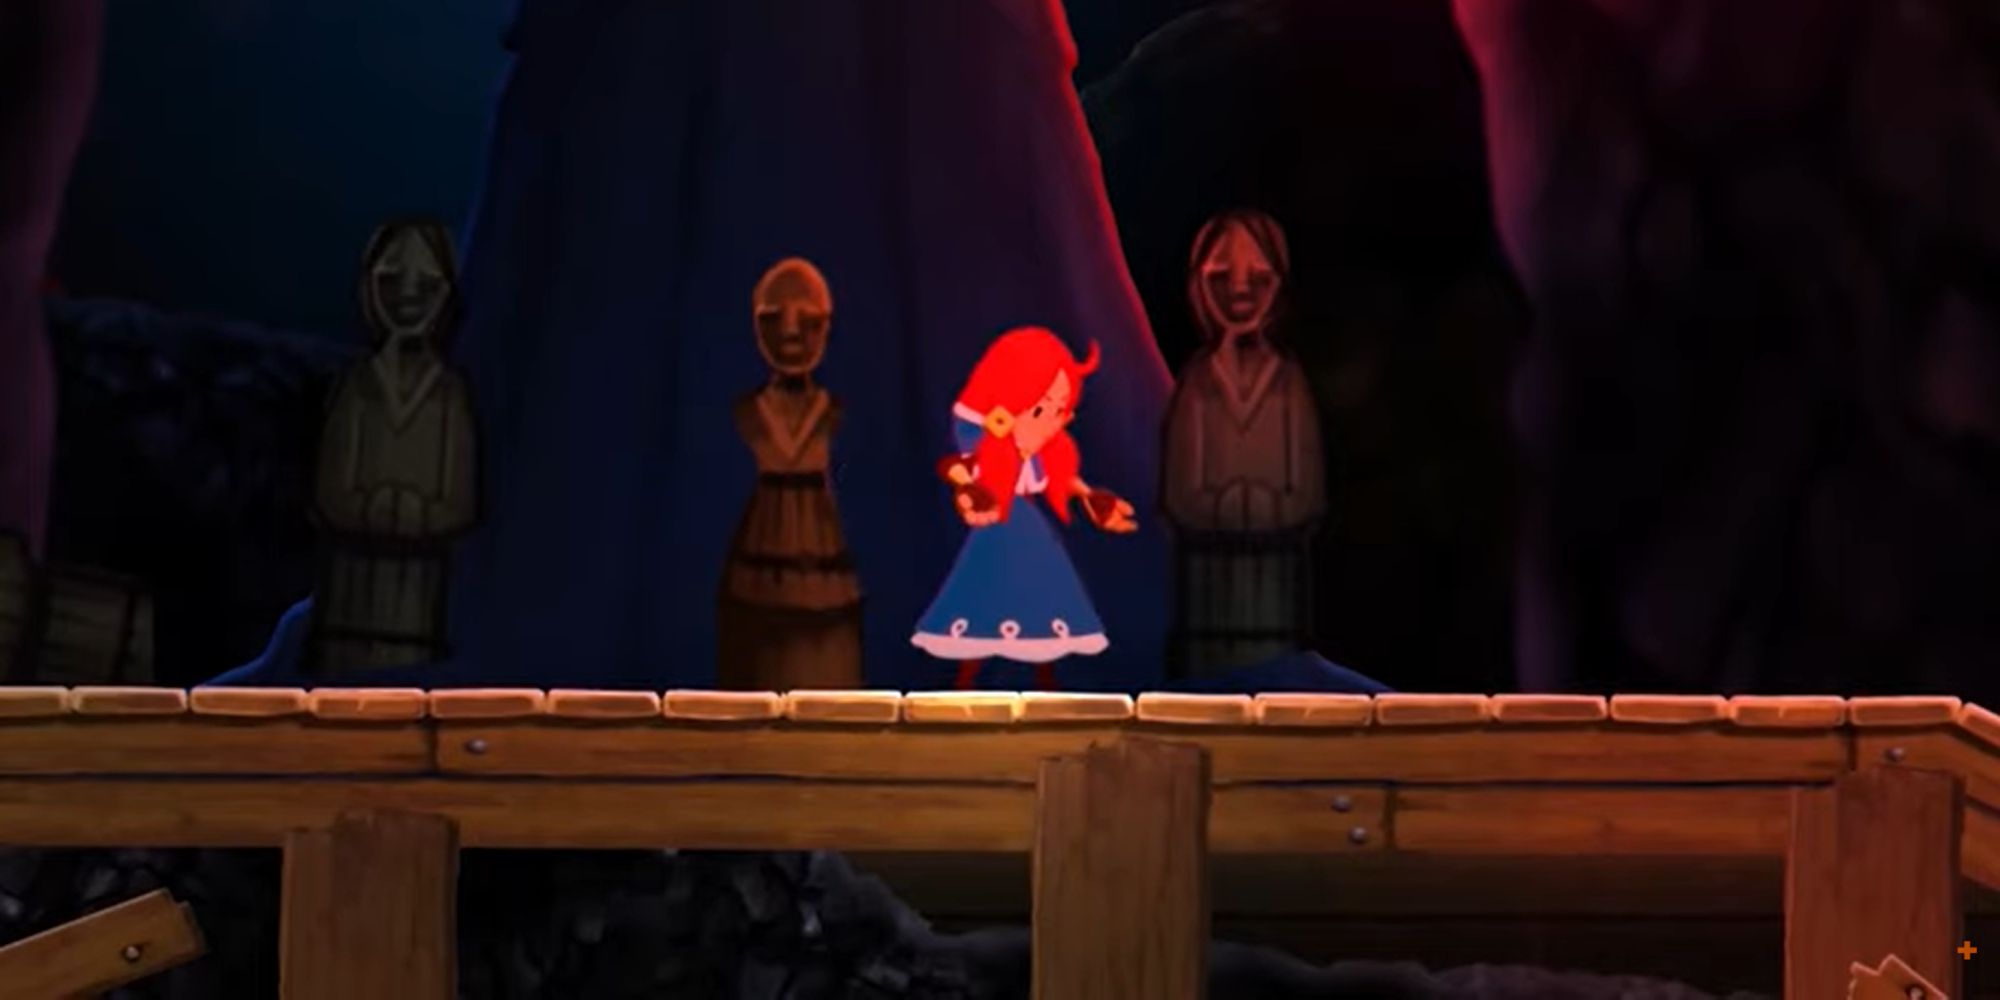 Teslagrad 2 To Launch In Spring 2023